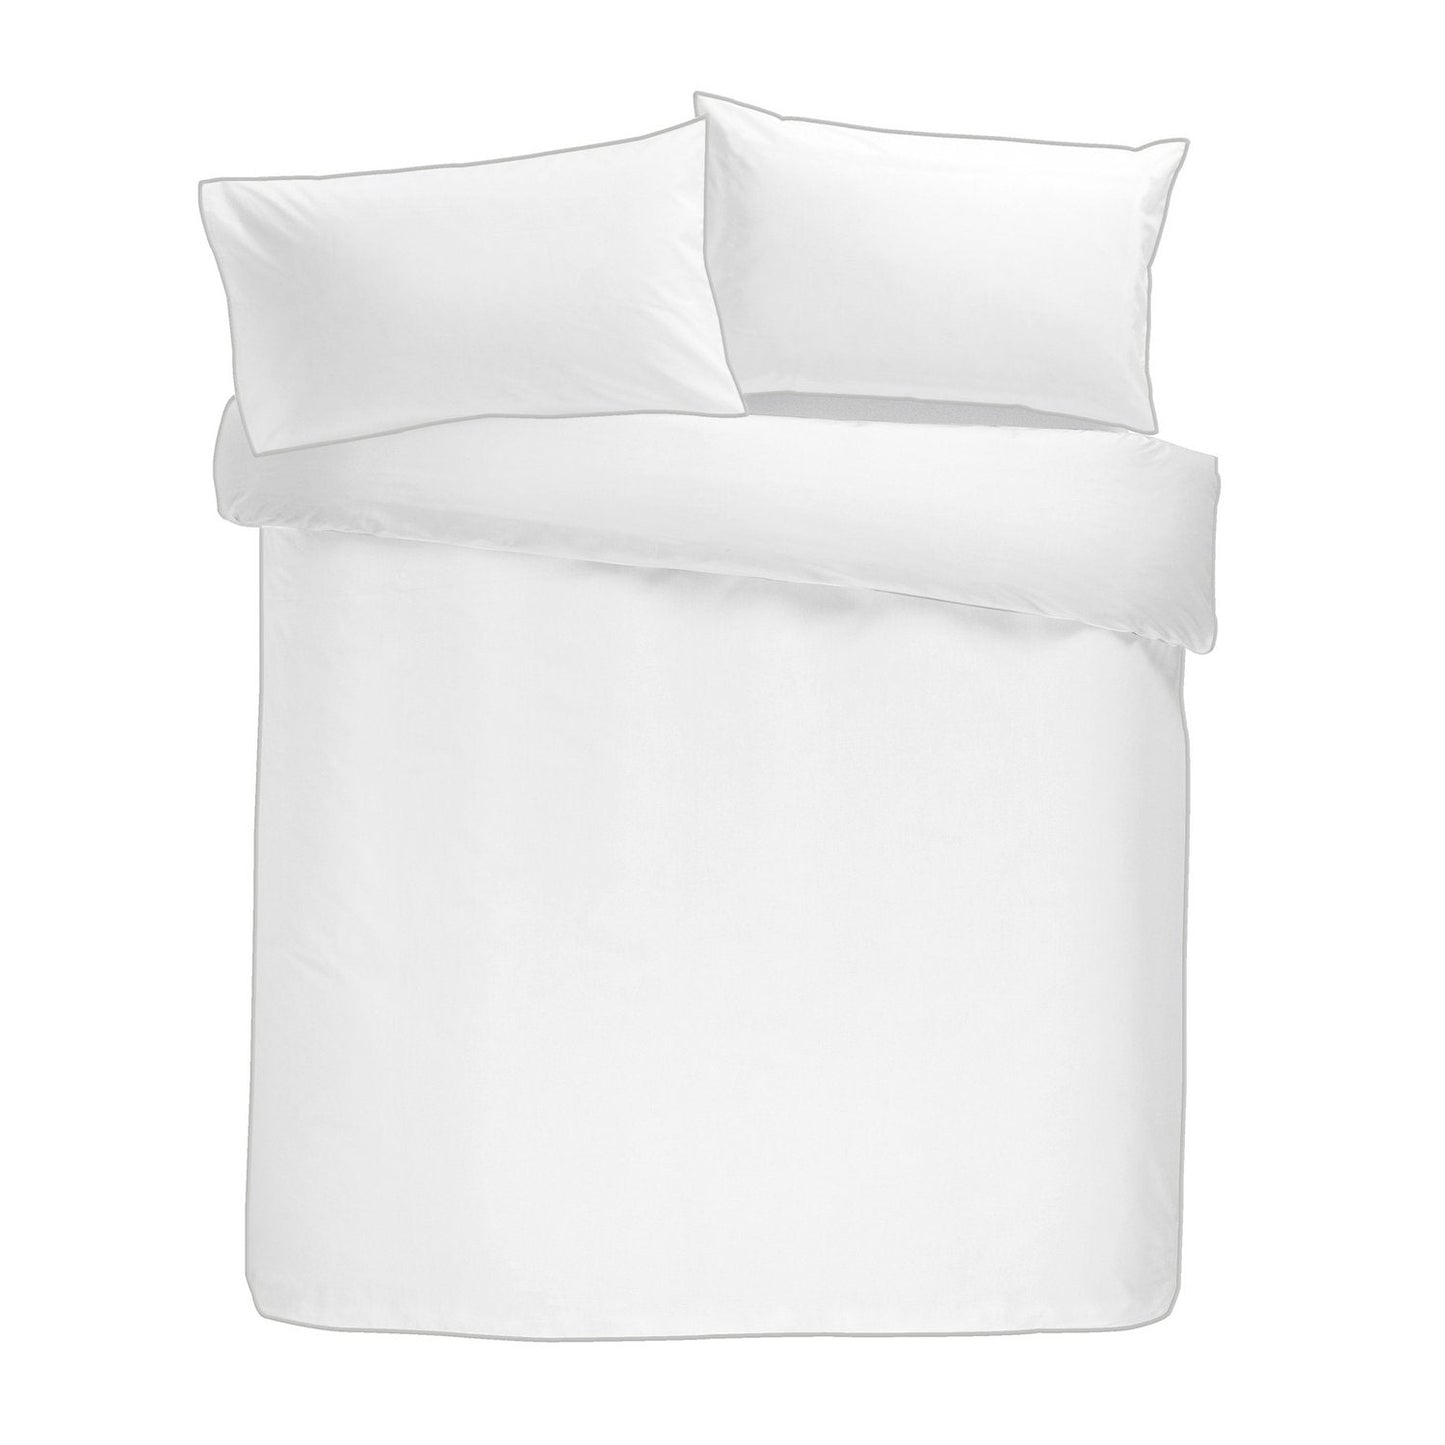 White With Silver Contrast Piping 200 Thread Count 100% Cotton Duvet Set